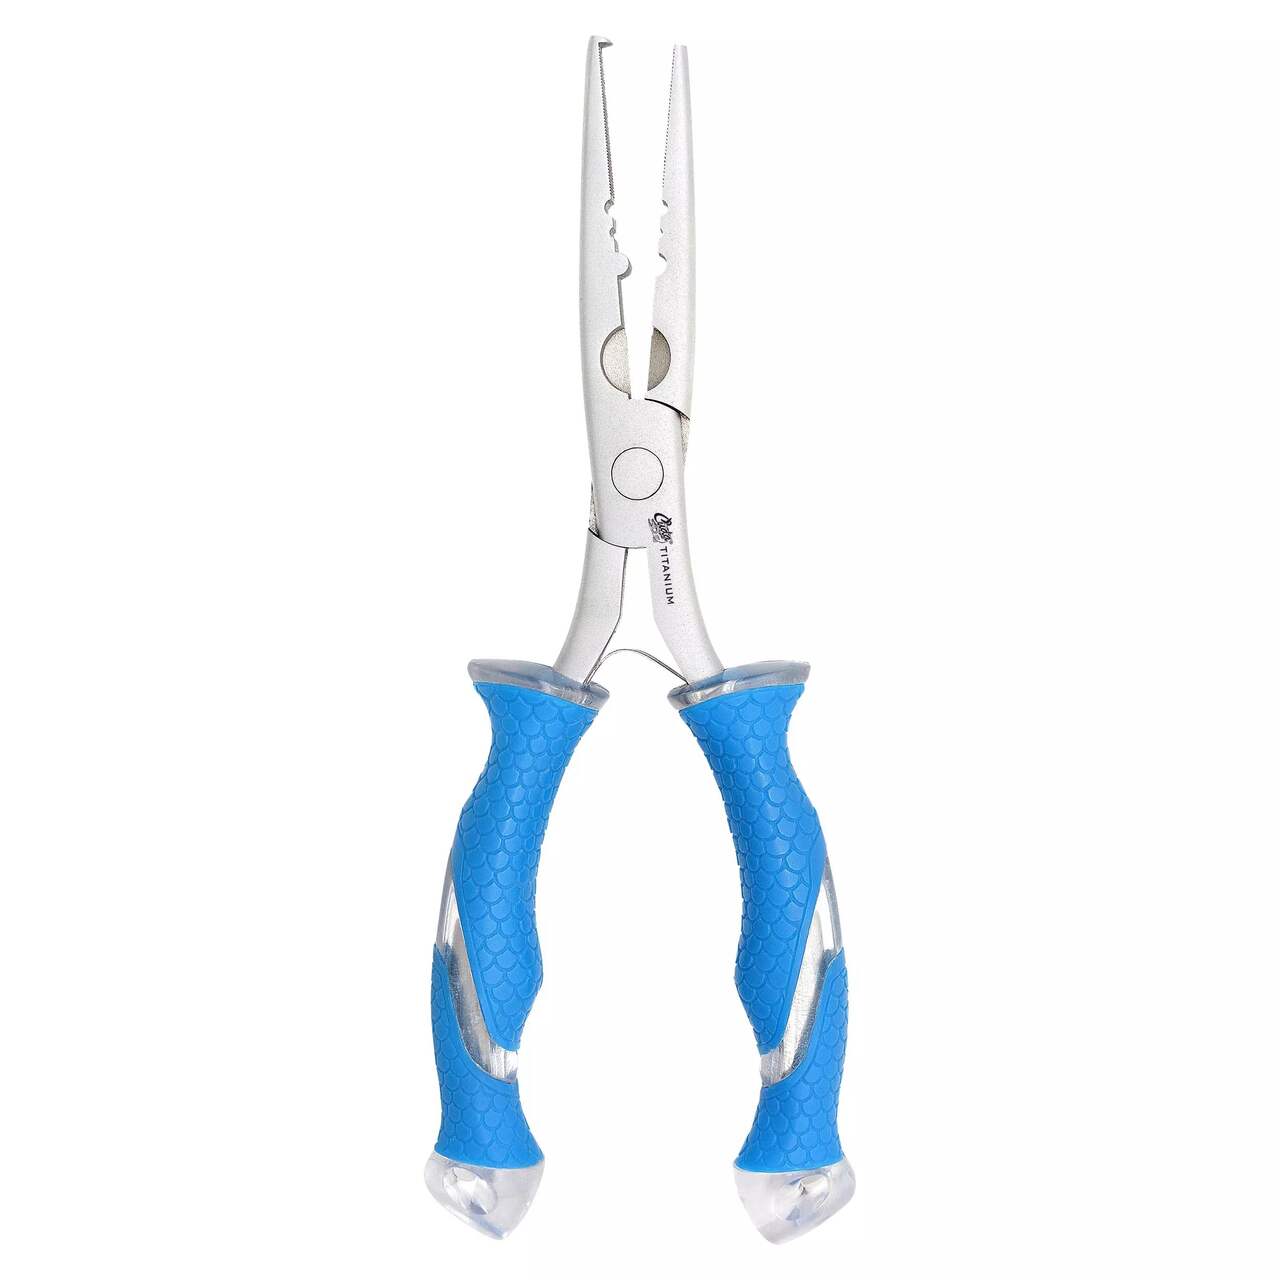 https://media-www.canadiantire.ca/product/playing/fishing/fishing-equipment/1782255/cuda-needle-nose-split-ring-pliers-8--4b963e58-a345-4b8d-afbe-b906c50d8865-jpgrendition.jpg?imdensity=1&imwidth=1244&impolicy=mZoom